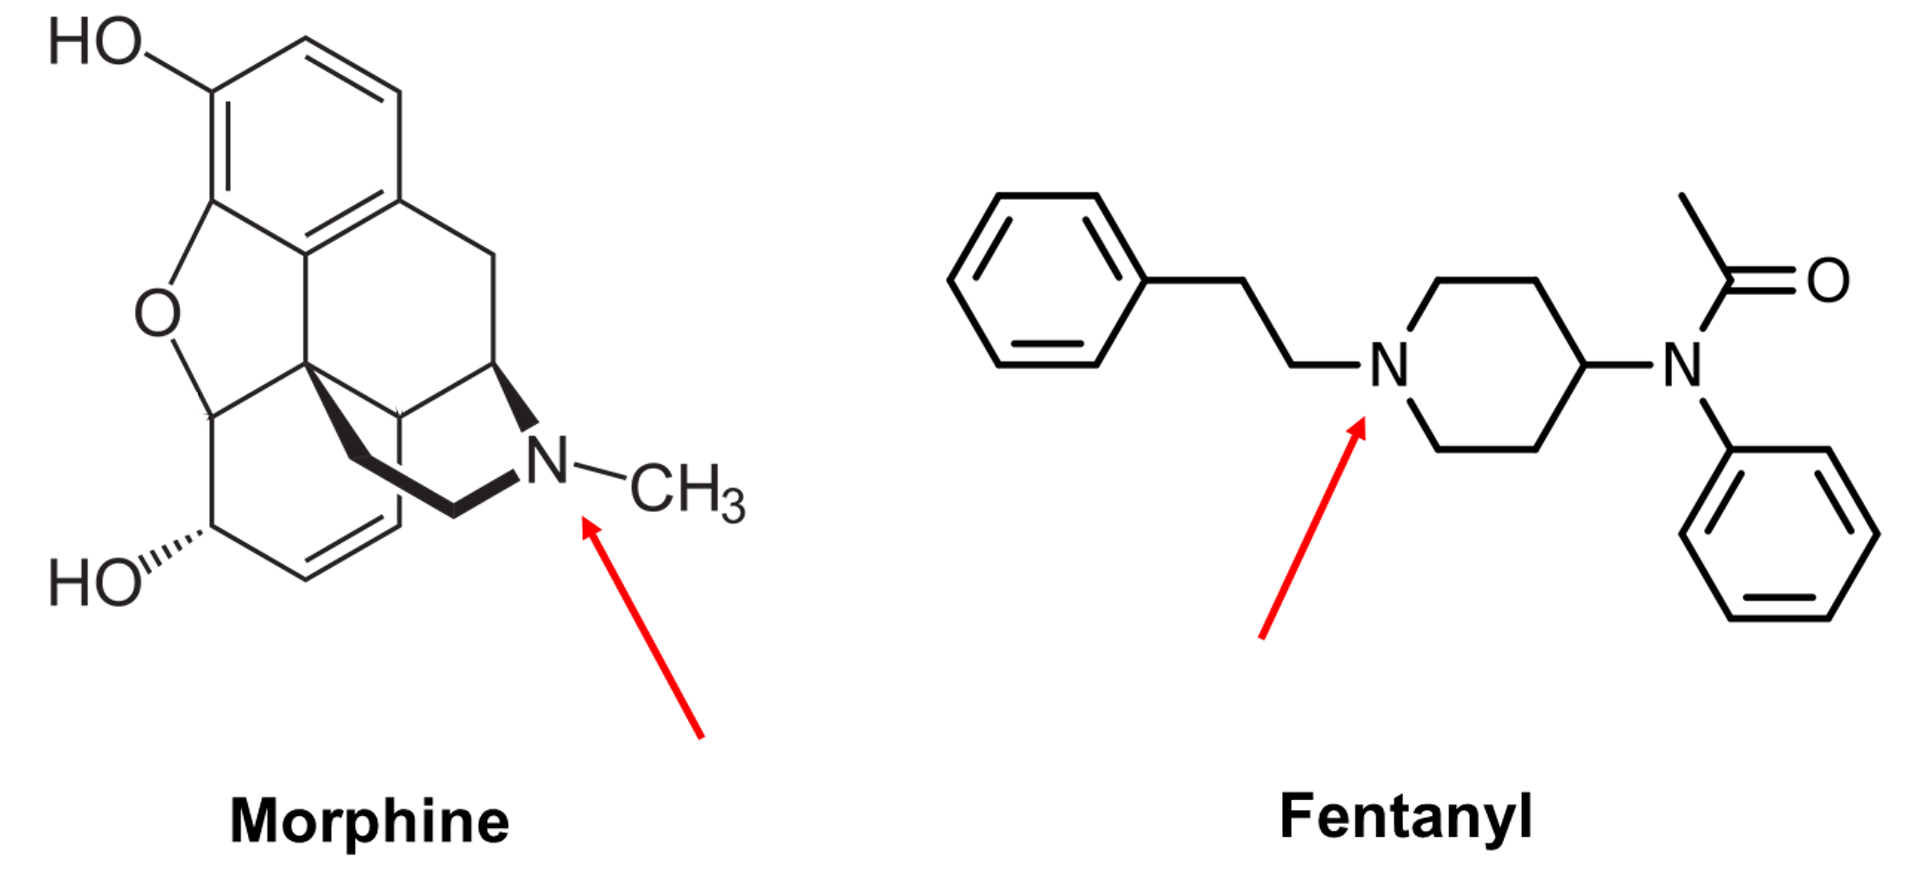 Chemical structures of morphine and fentanyl